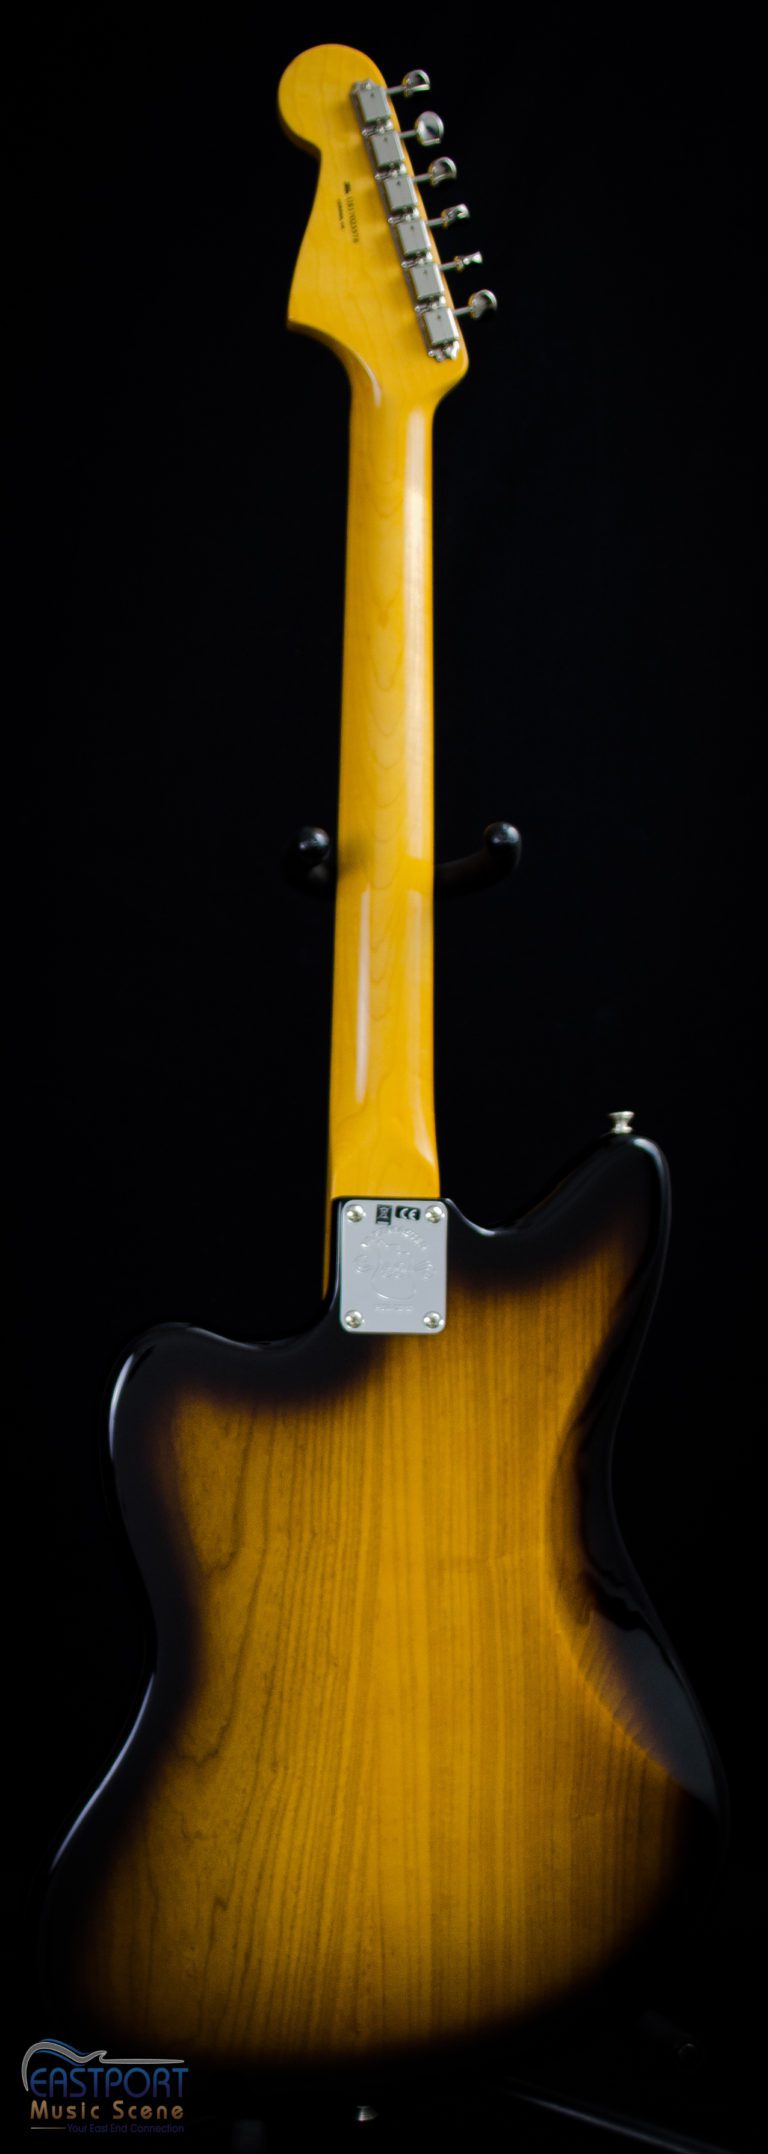 A guitar with an electric yellow neck.